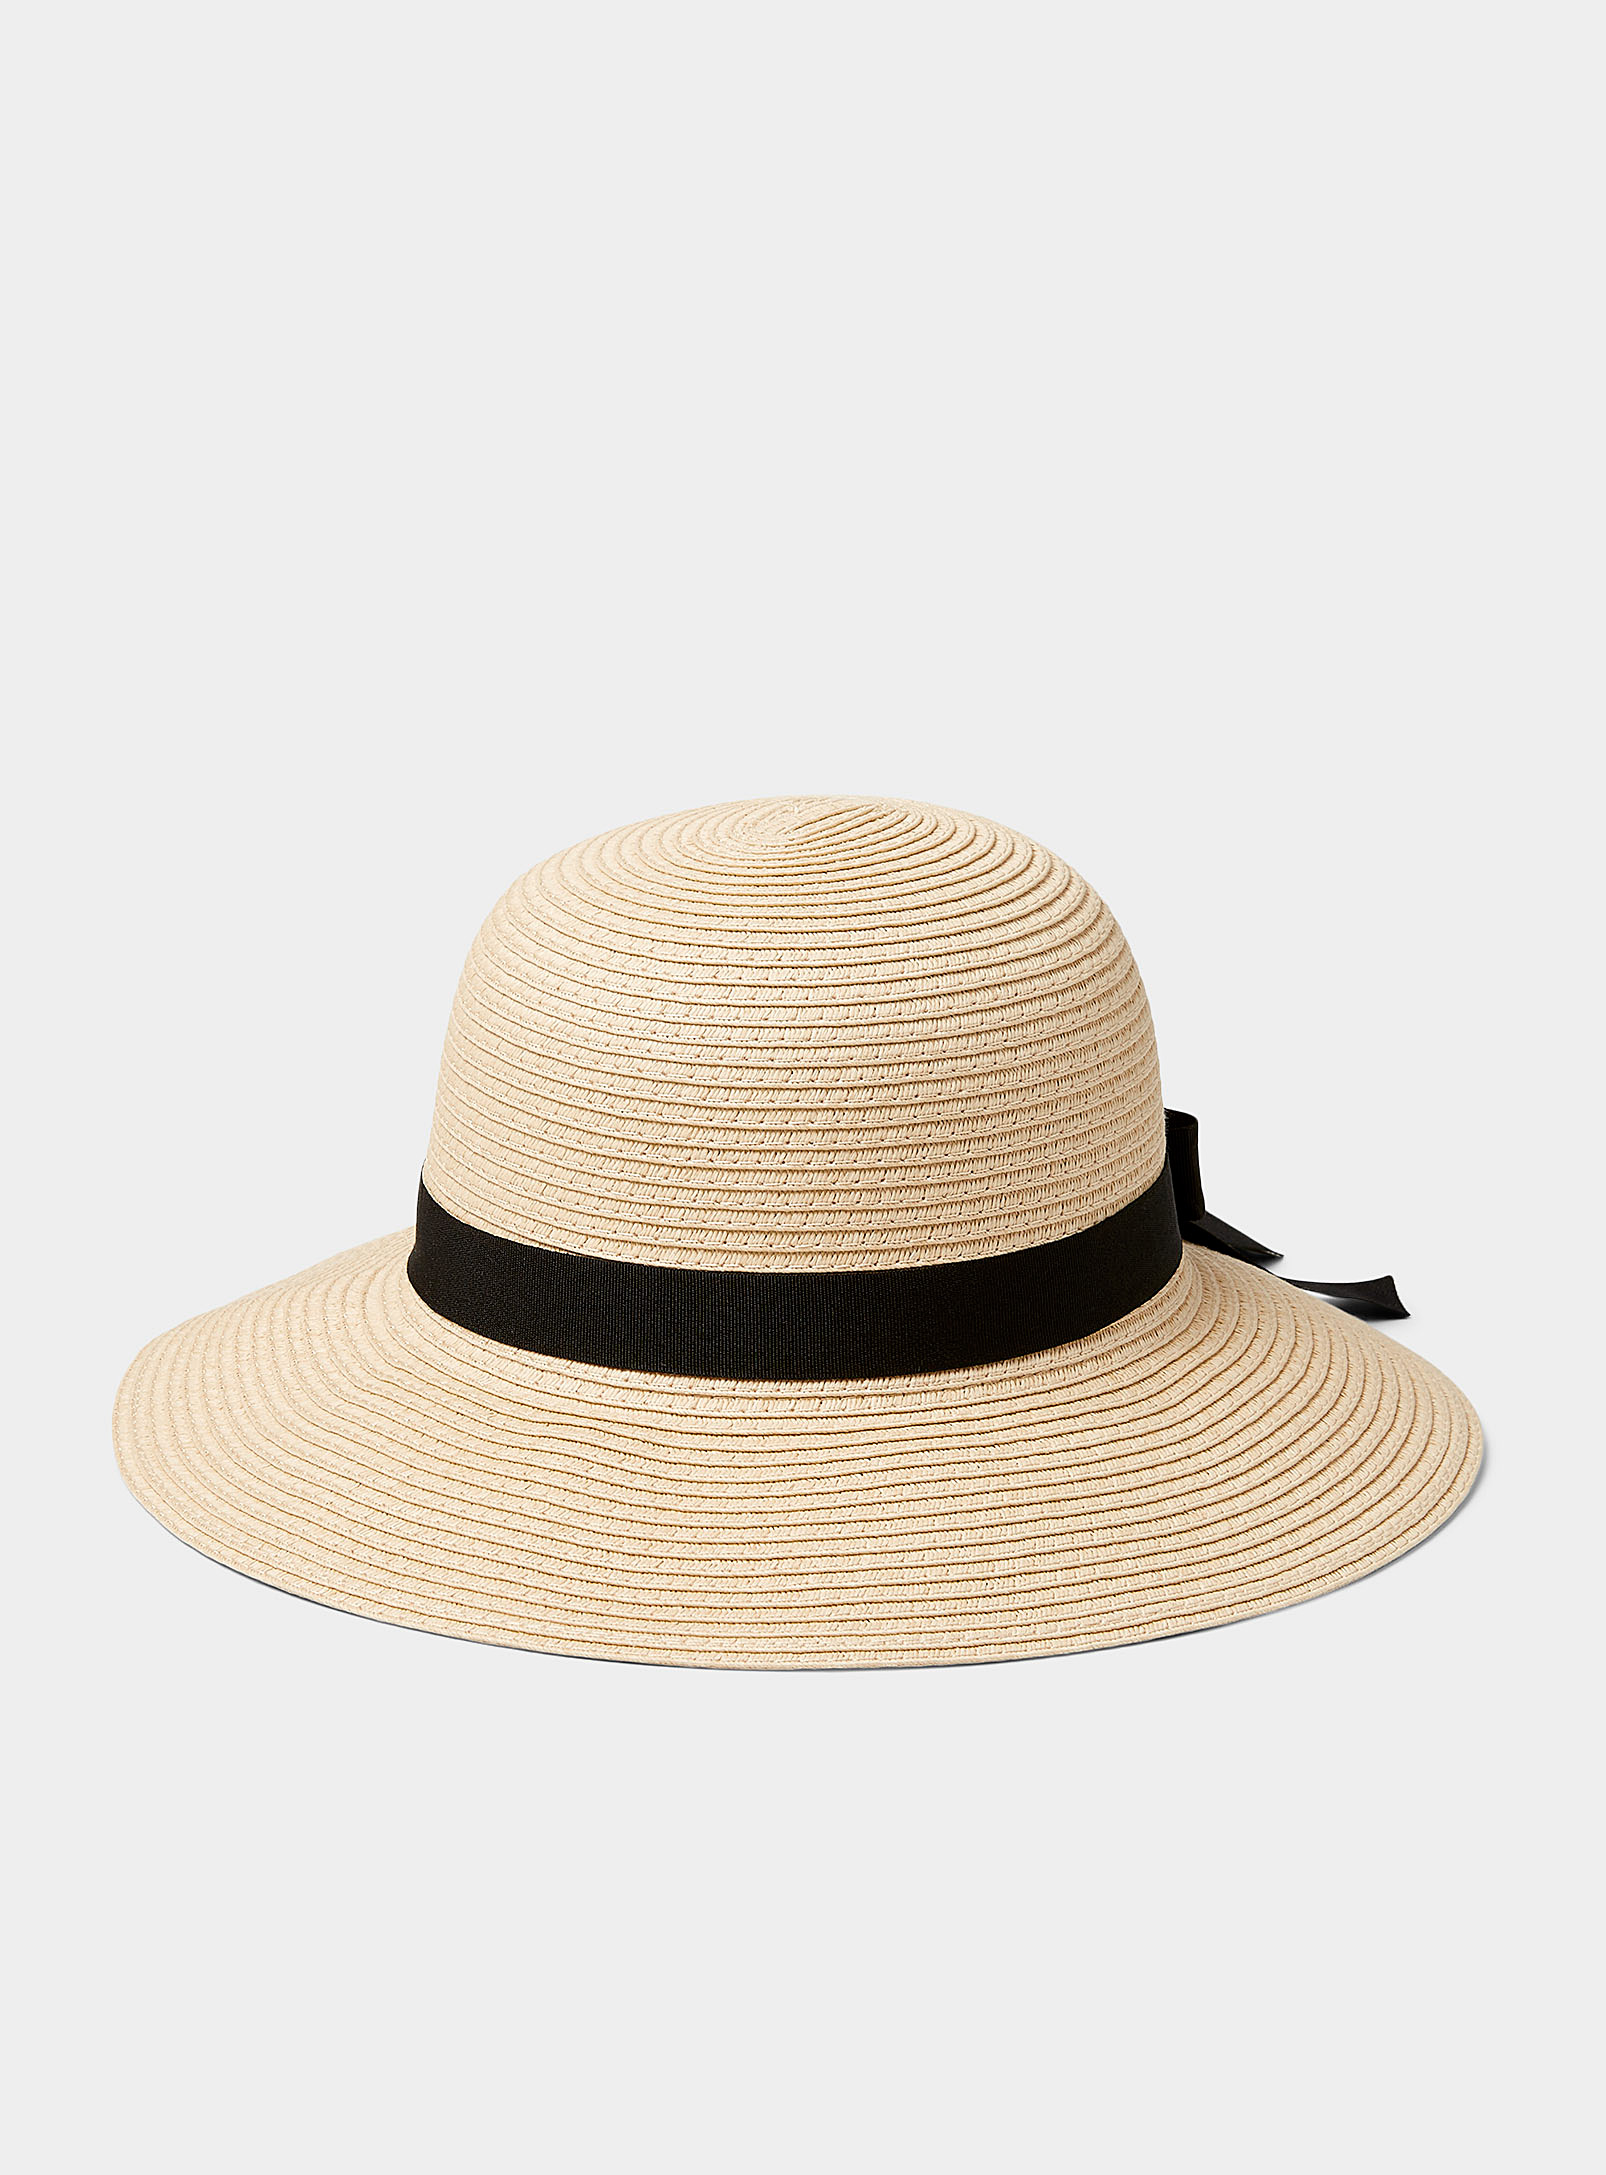 Simons - Women's Ribbon and bow straw Cloche Hat